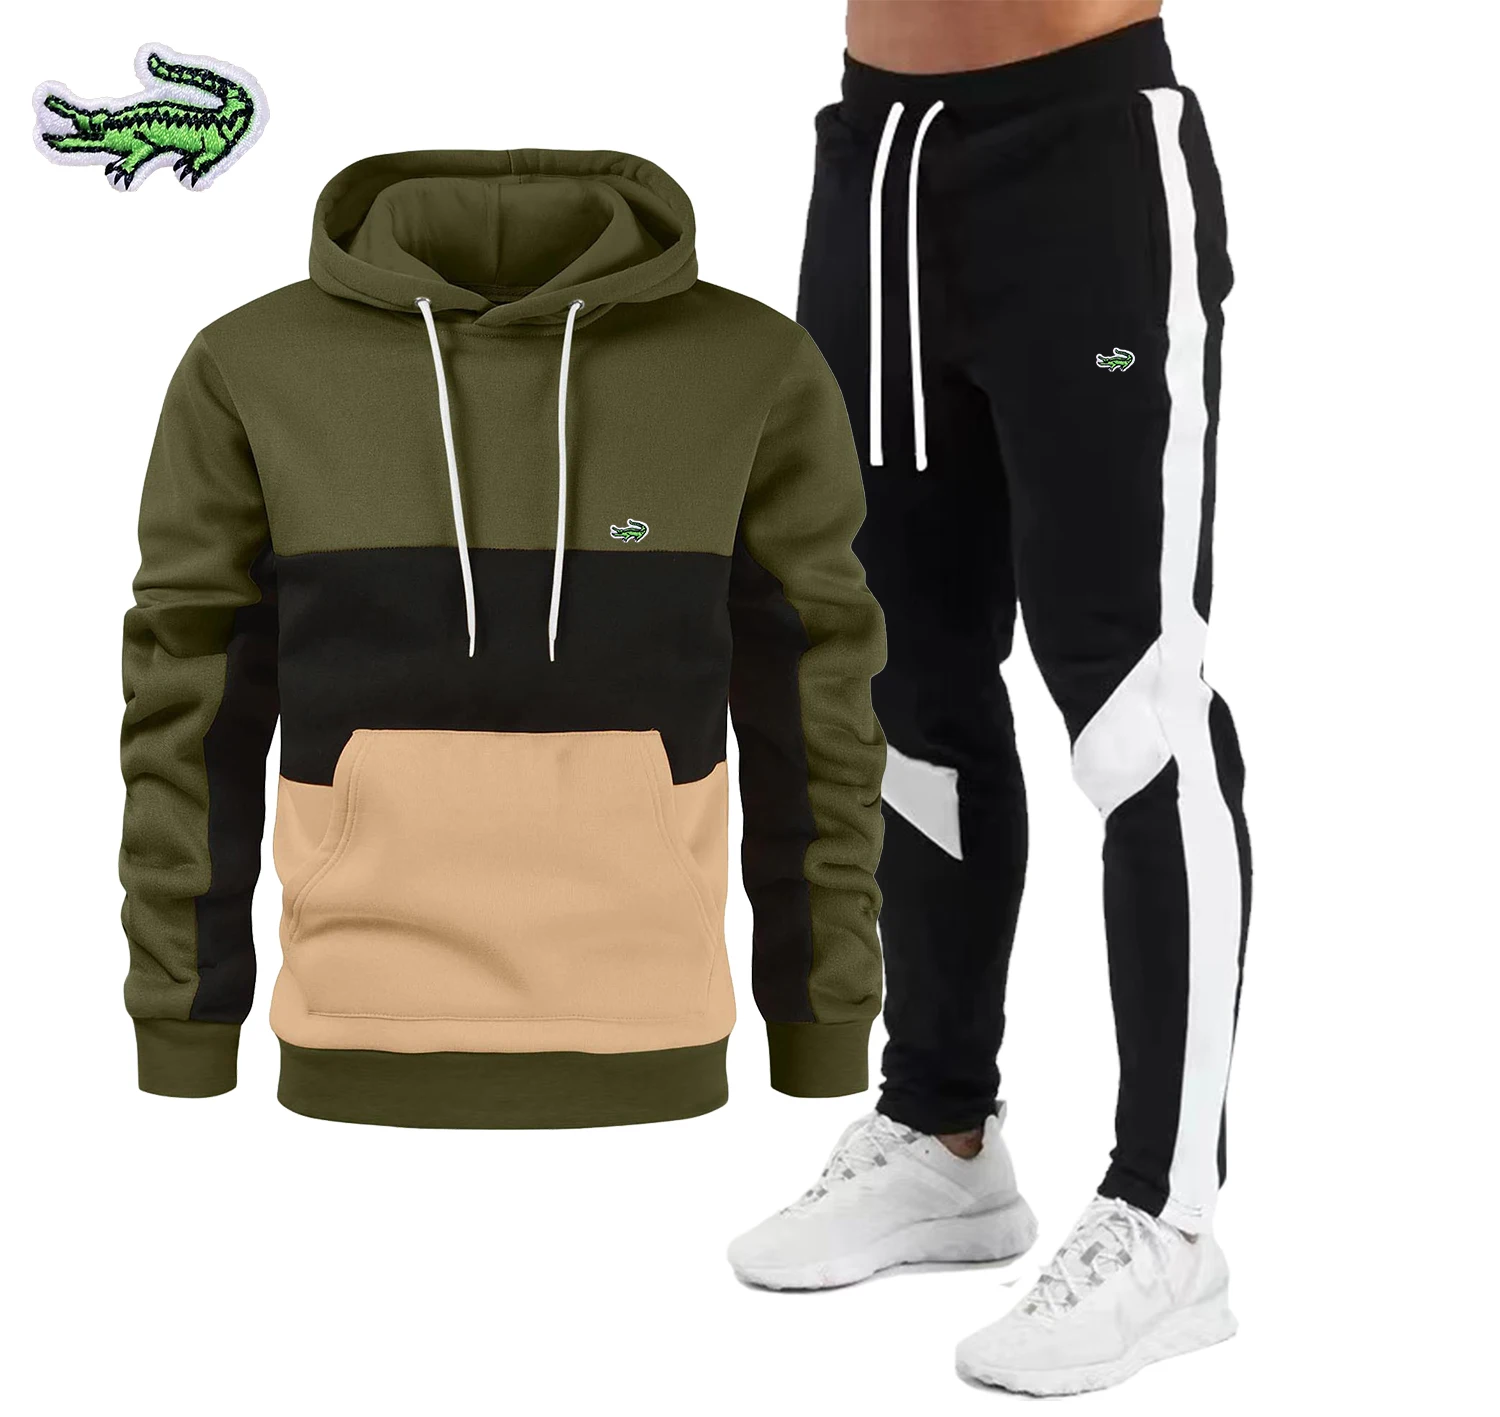 2023 New Men's Autumn Winter Sets Hoodie+Pants Pieces Casual Tracksuit Male Sportswear Brand CARTELO Clothing Sweat Suit